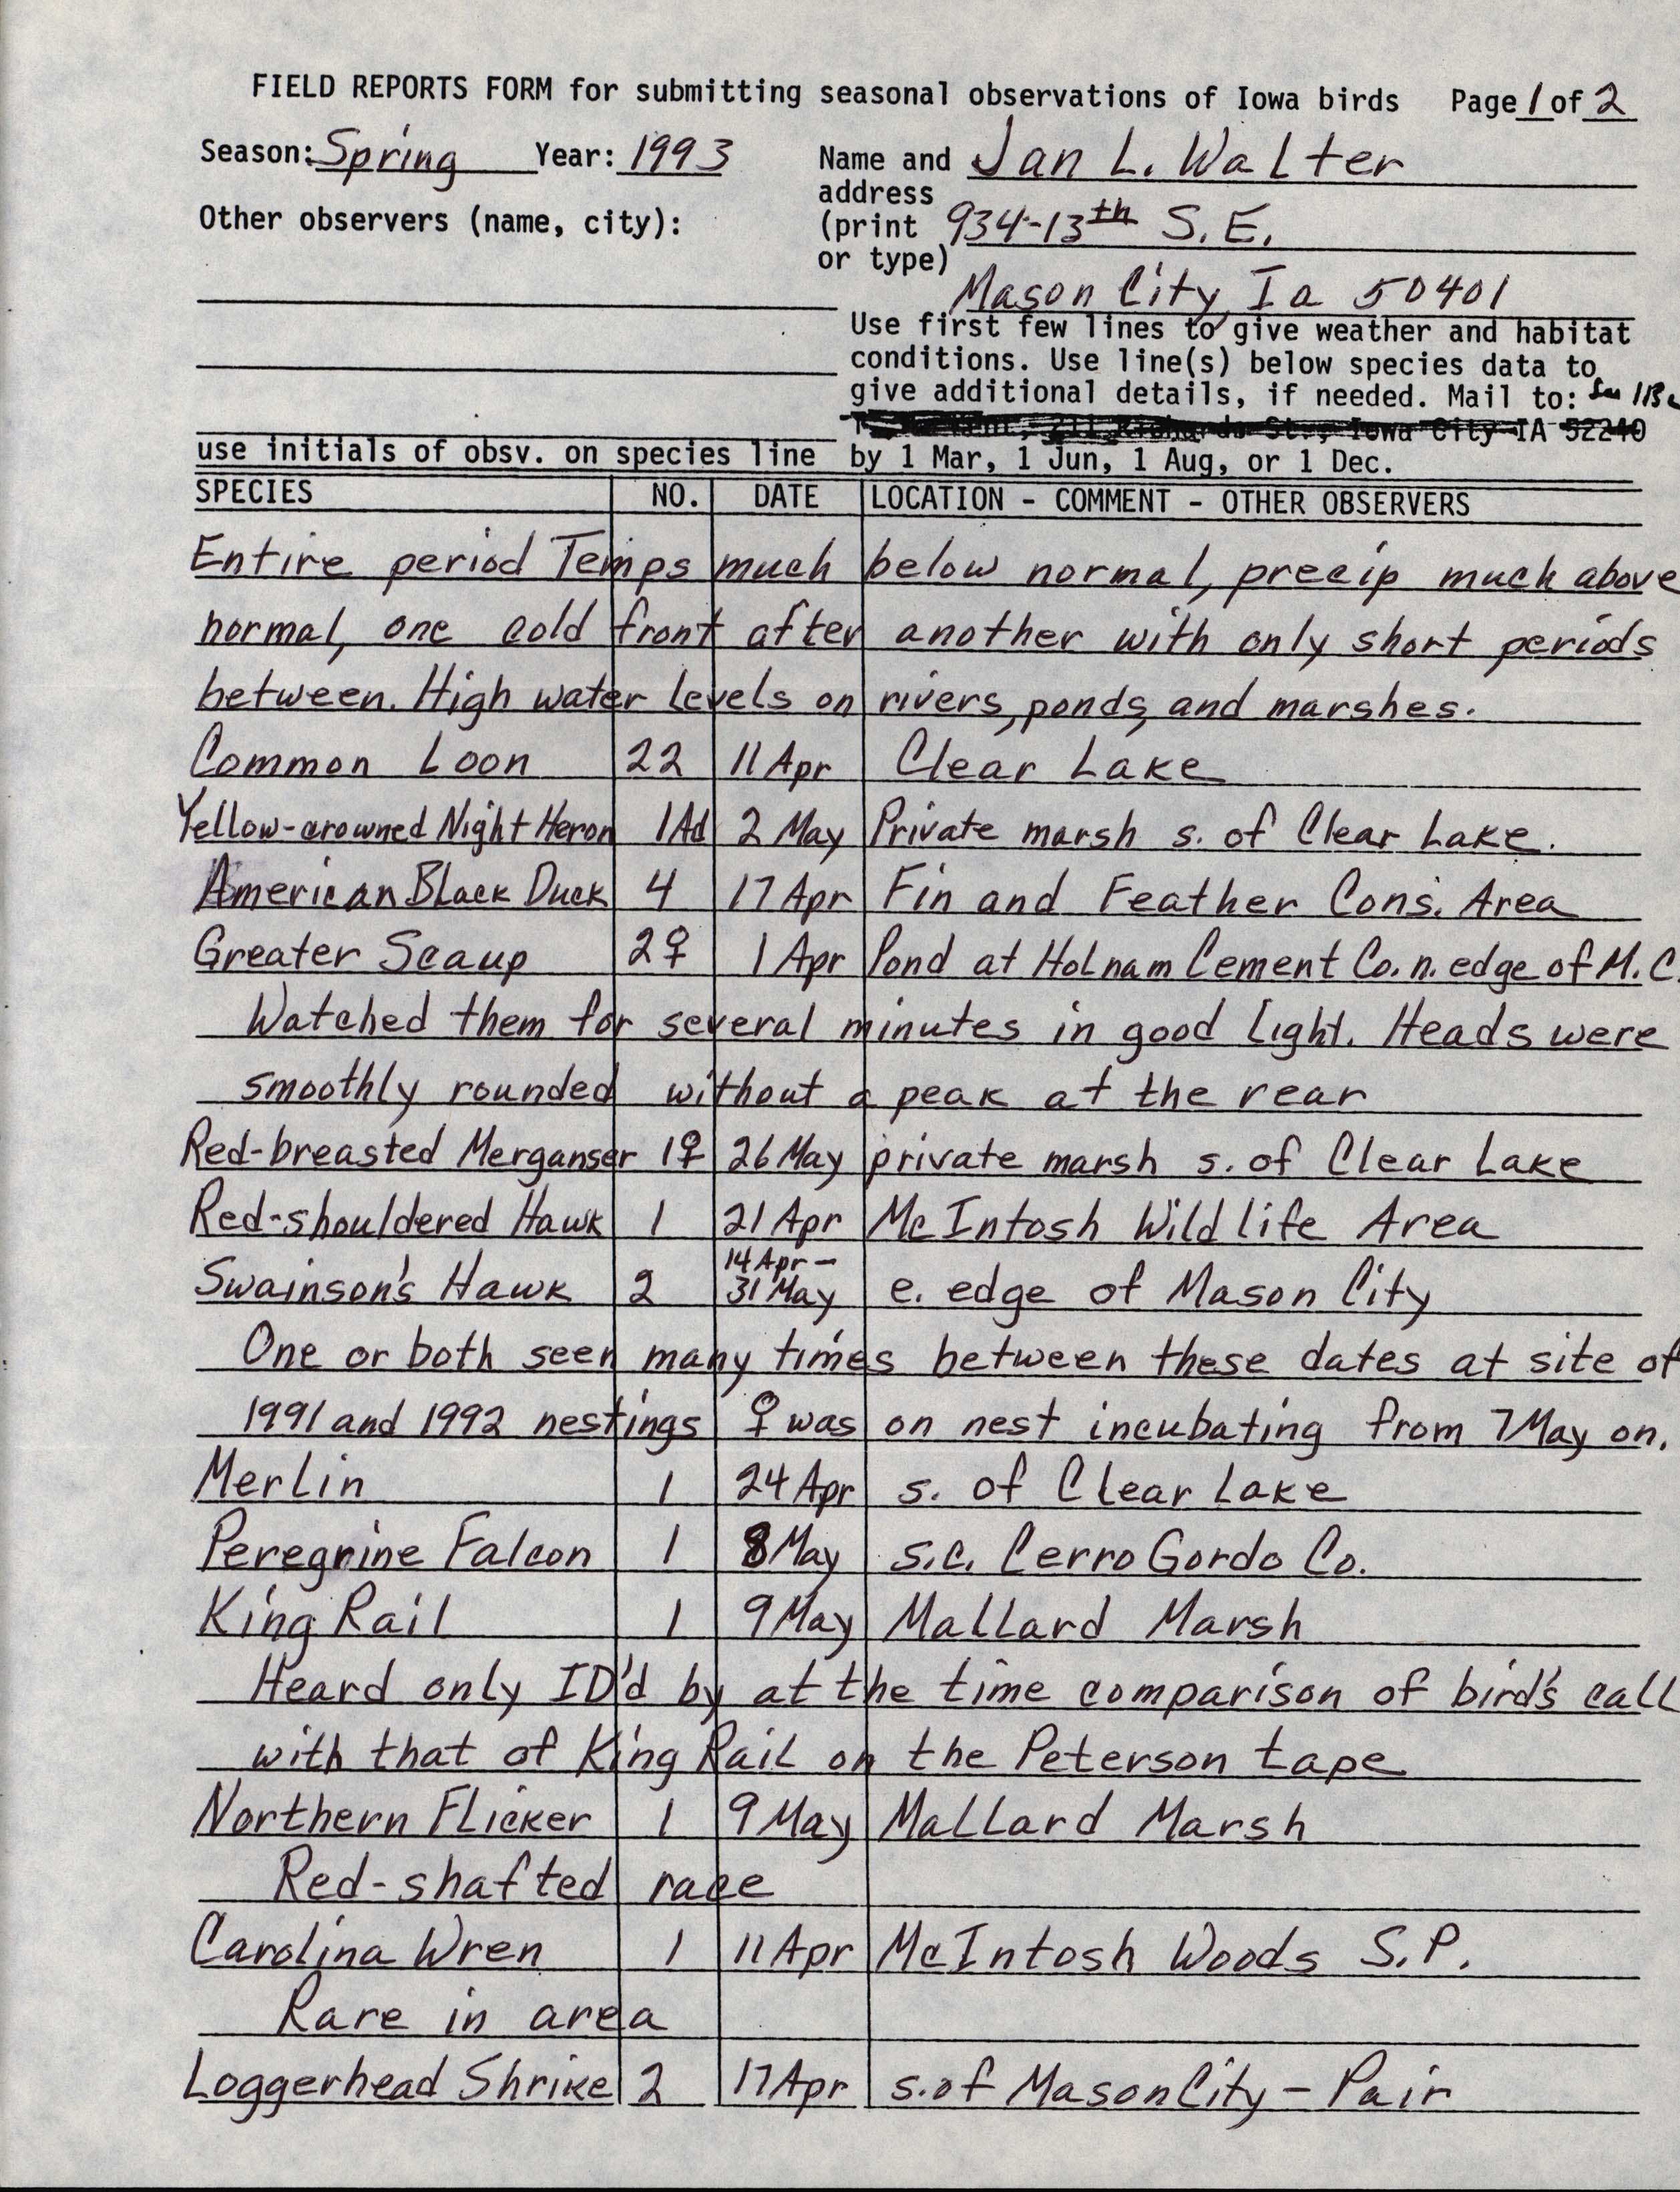 Field reports form for submitting seasonal observations of Iowa birds, Jan Walter, Spring 1993